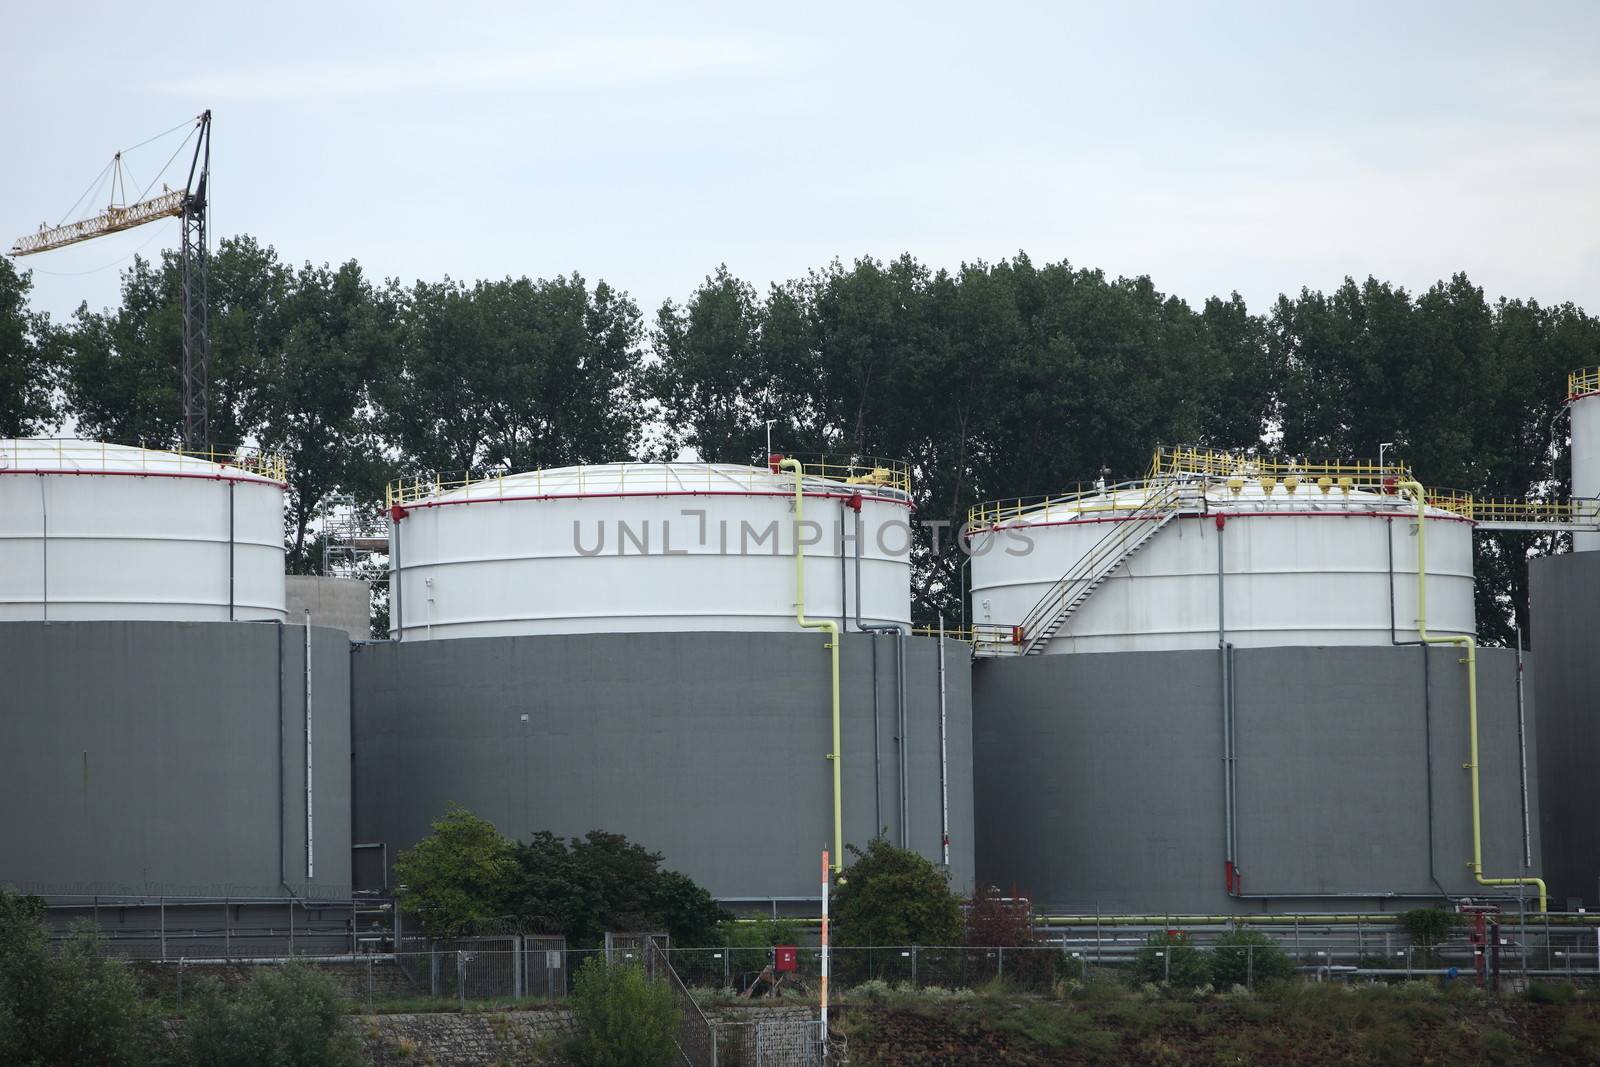 Three metal industrial storage tanks at an industrial site or processing plant